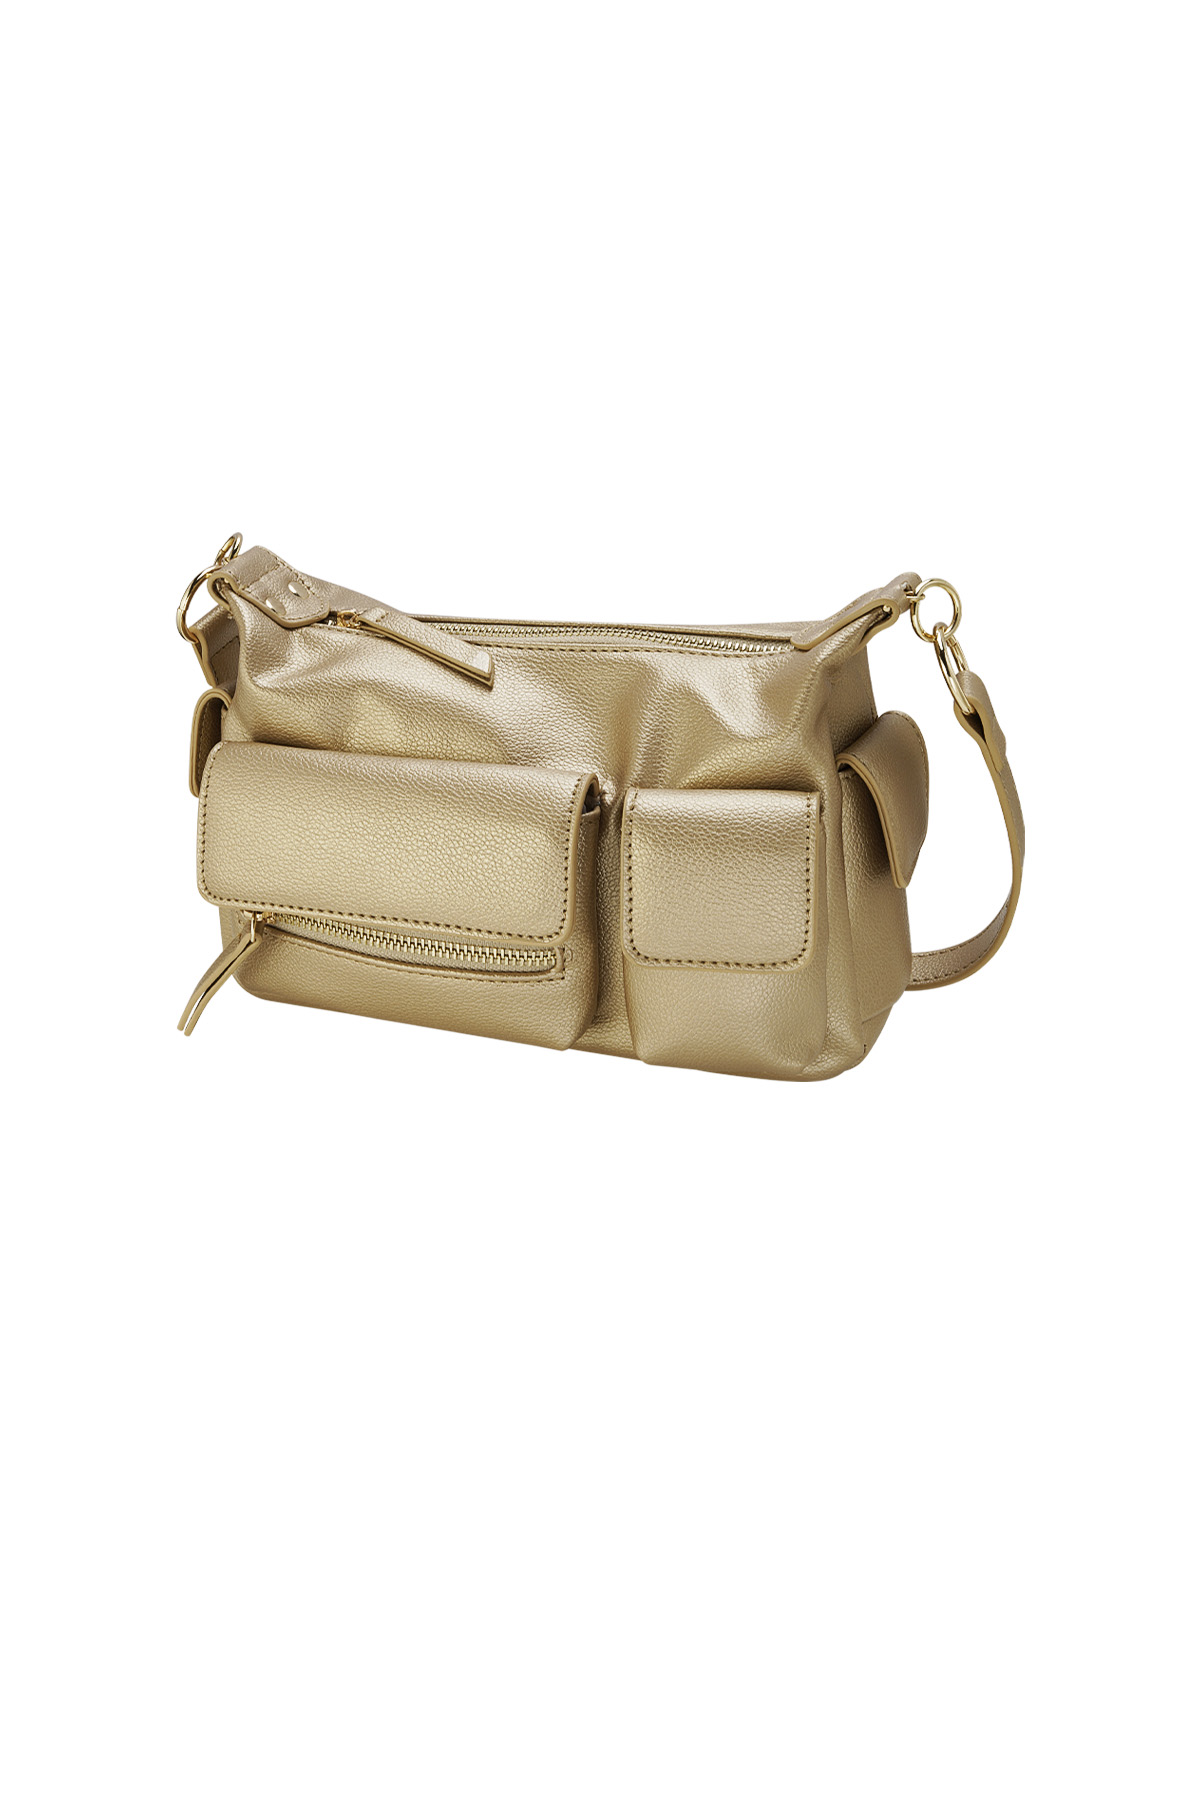 Statement bag with compartments - gold 